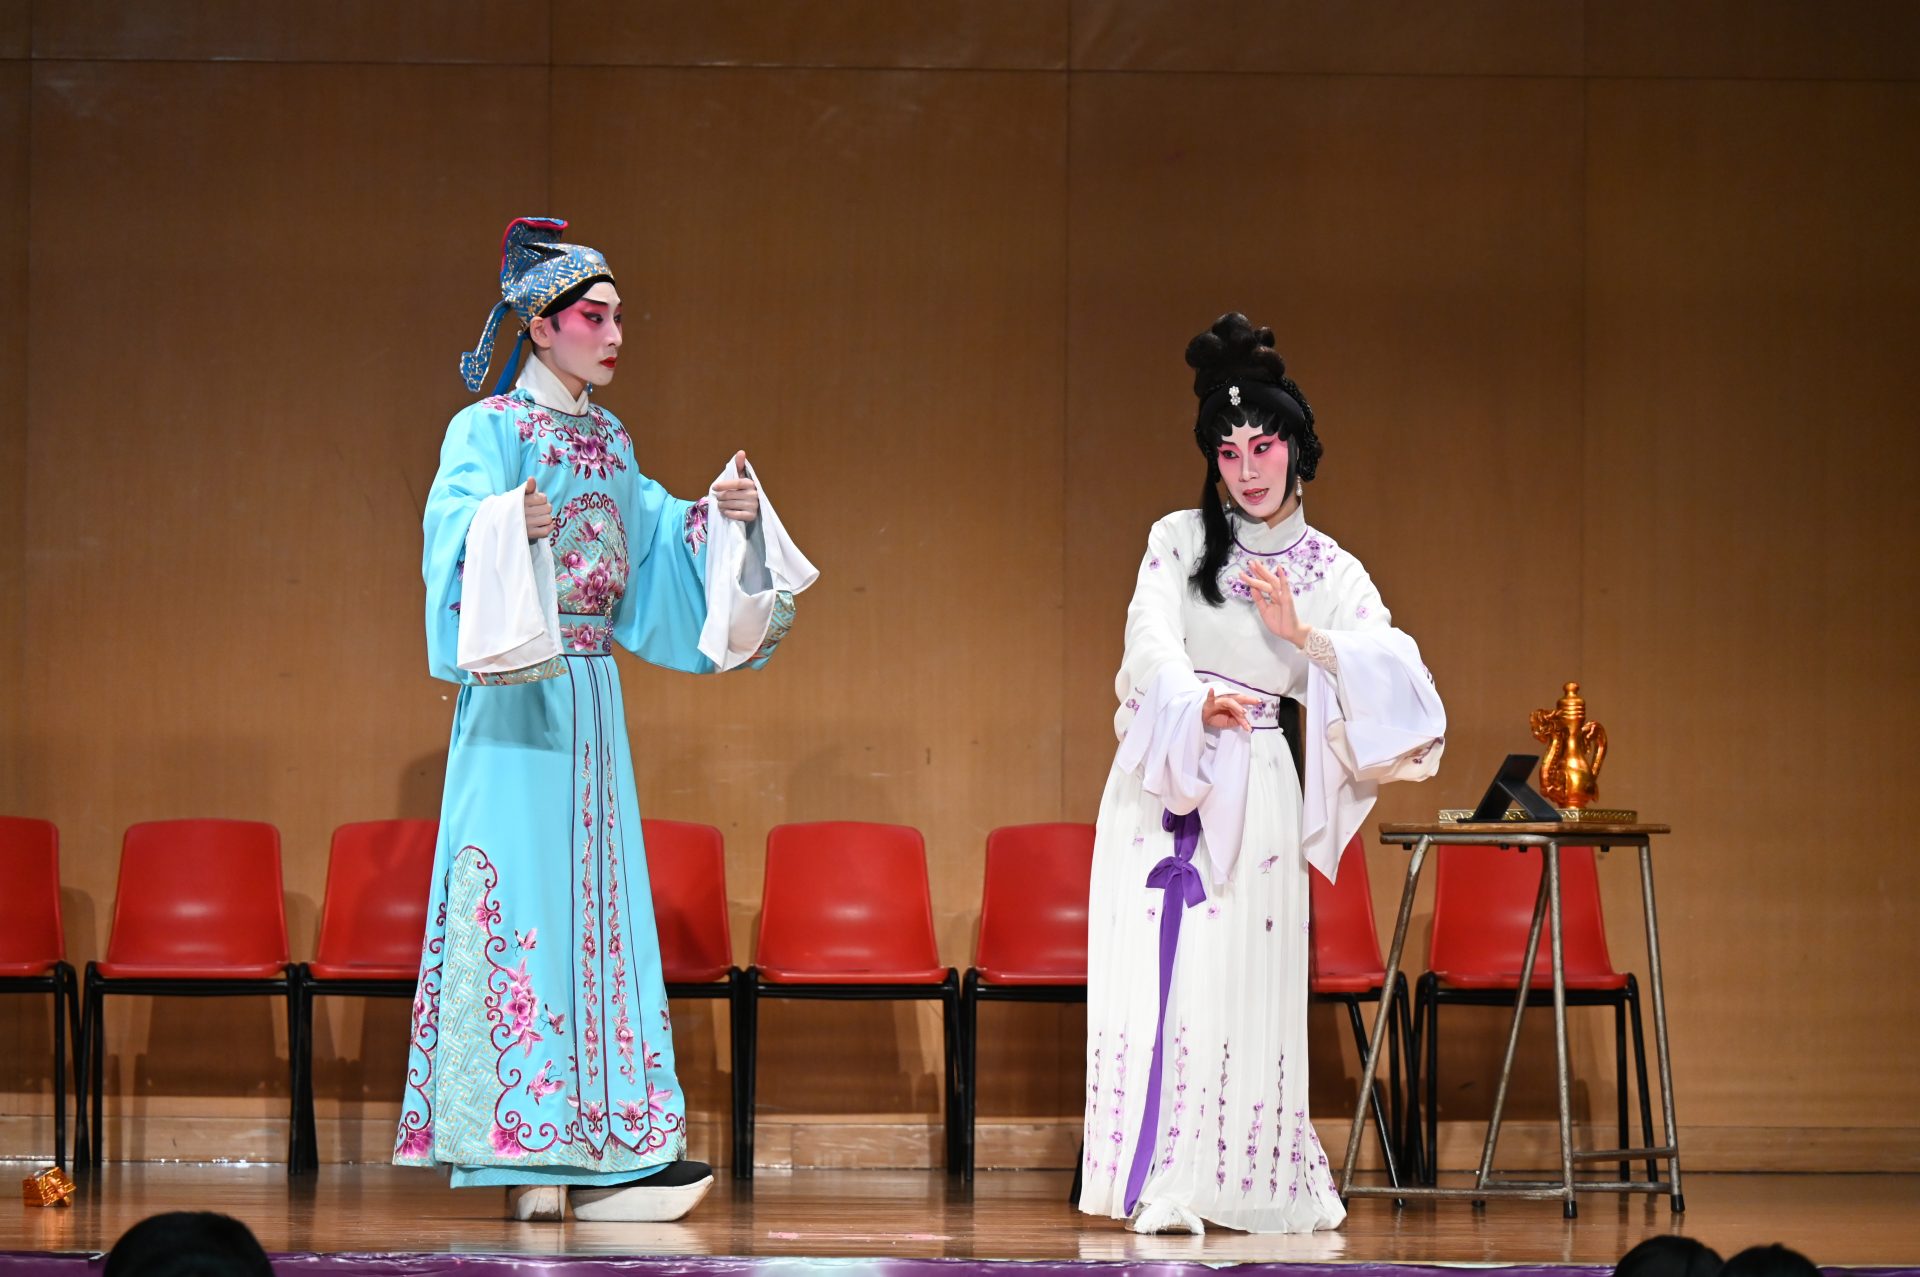 Cantonese Opera Performers singing and acting on stage.